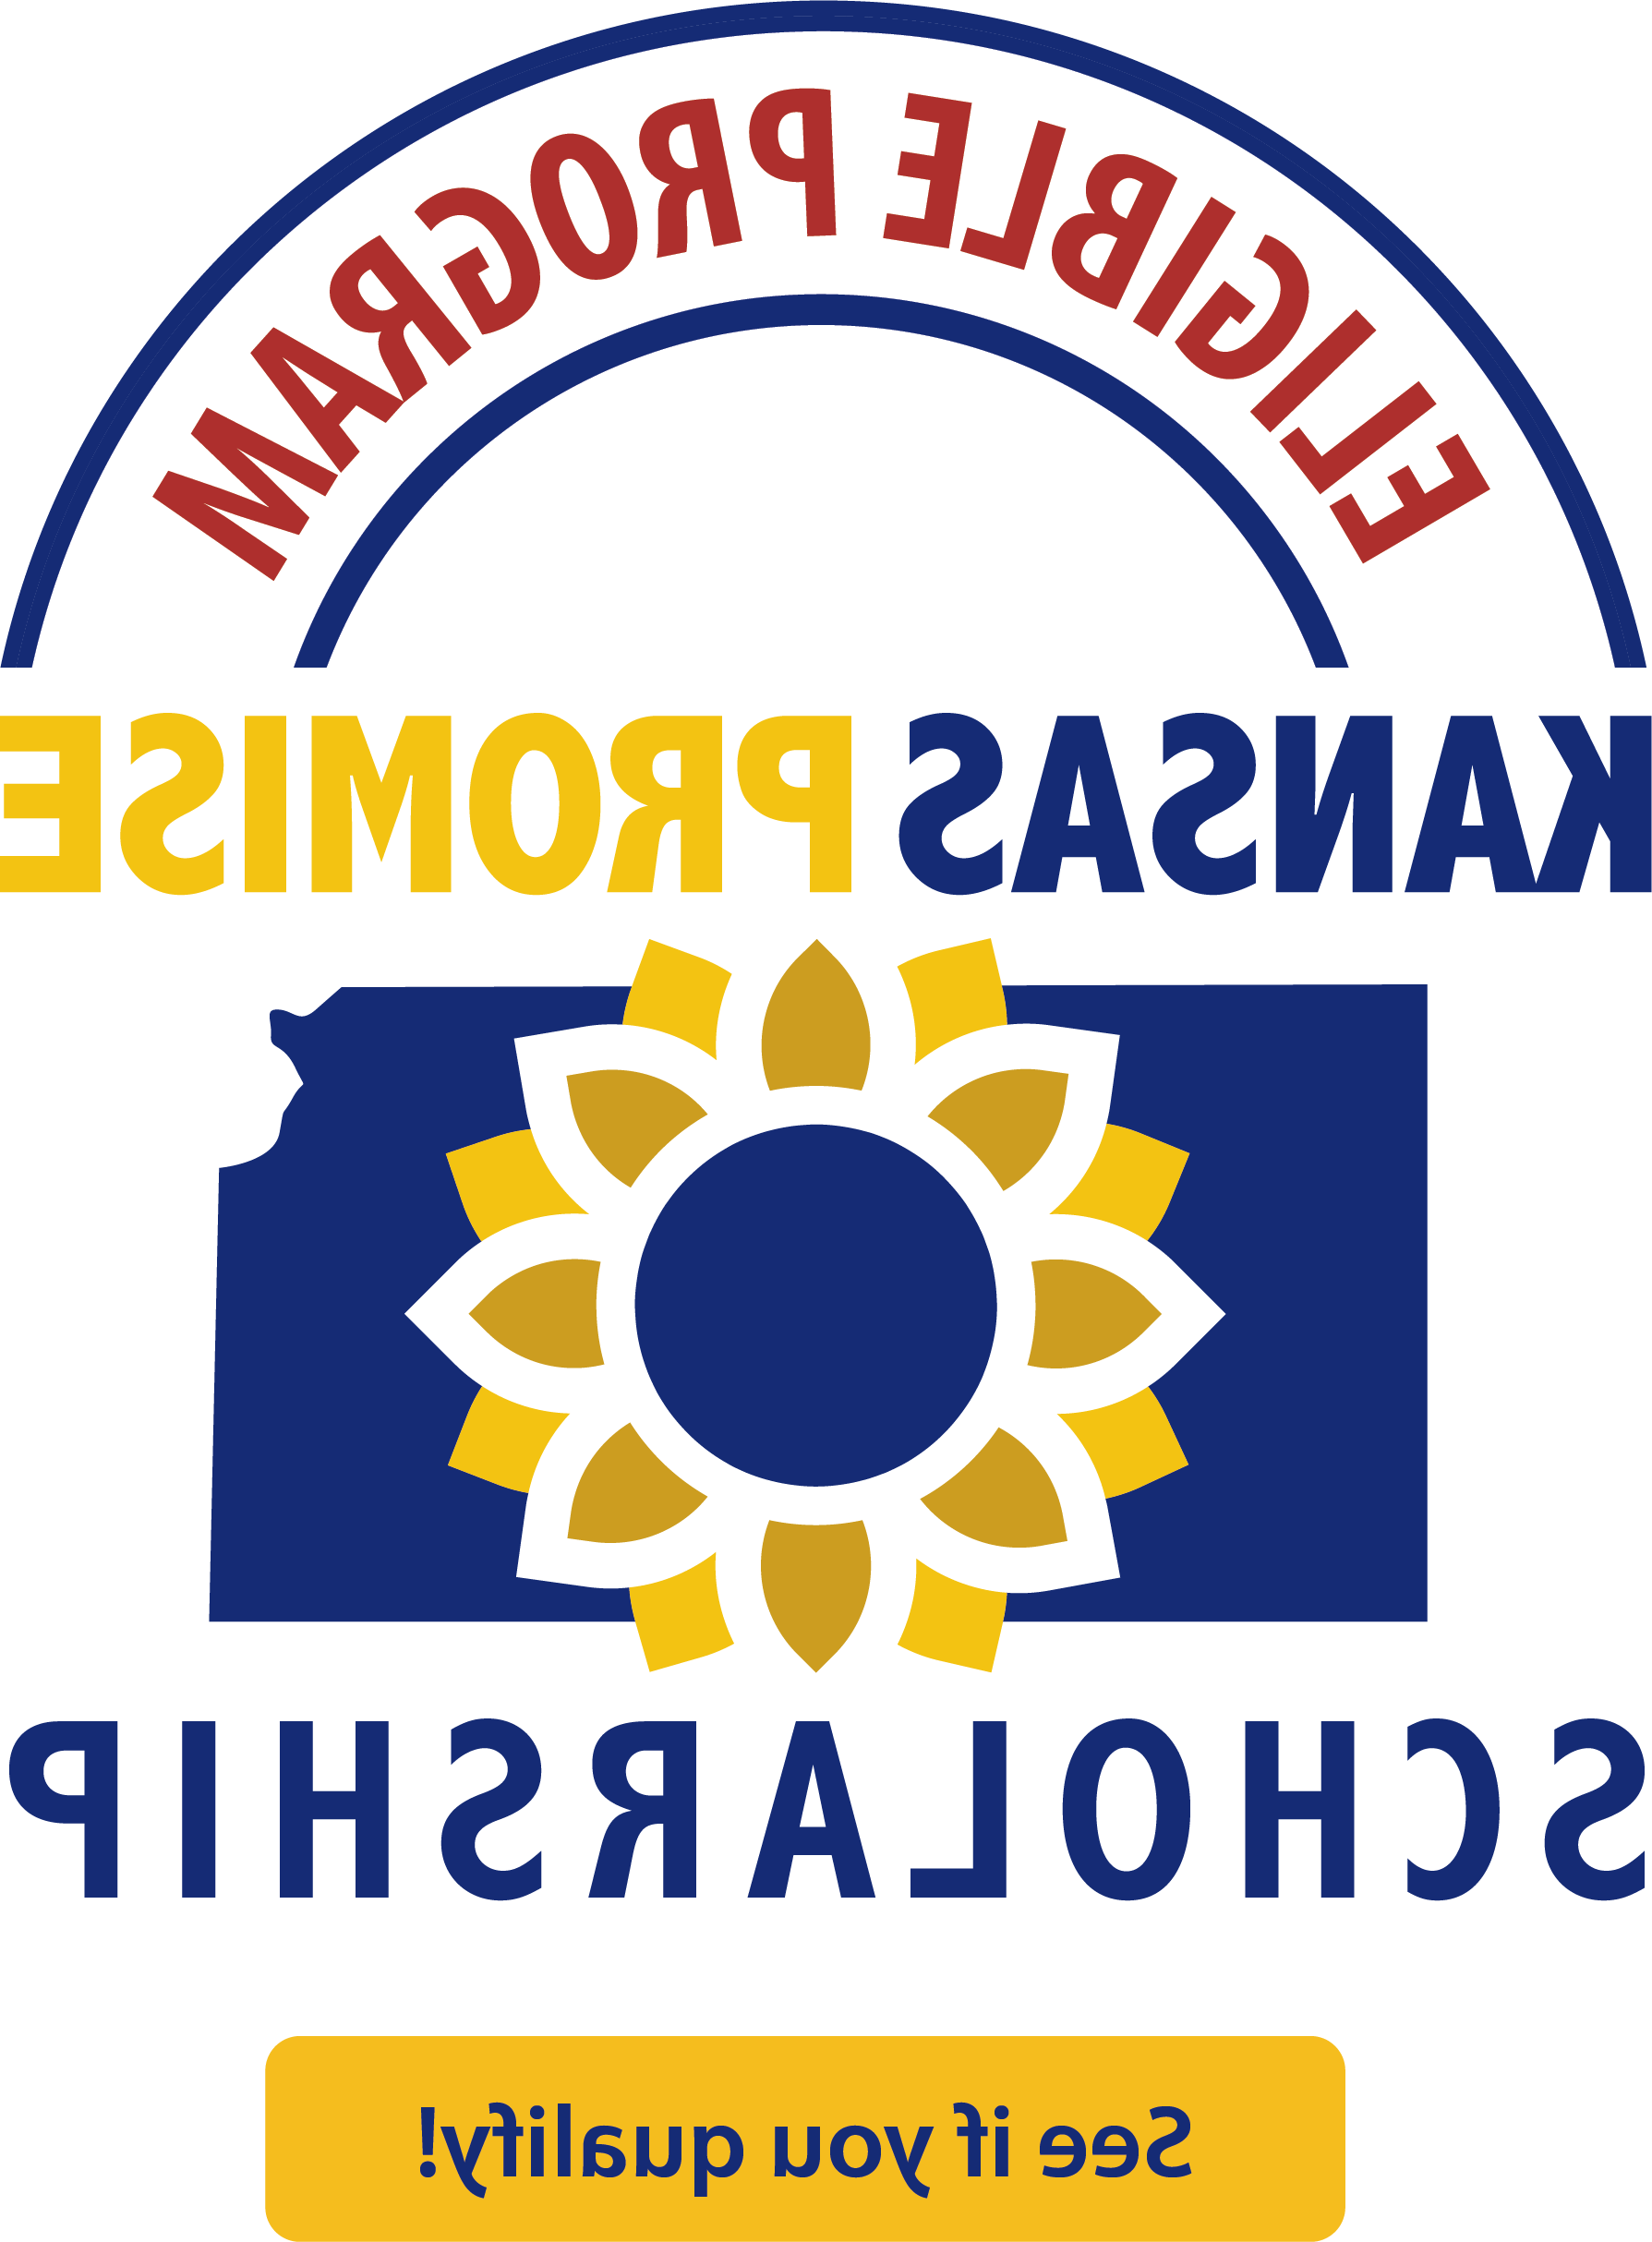 Stylized image of a sunflower in blue and yellow colors with the words Kansas Promise Eligible Program